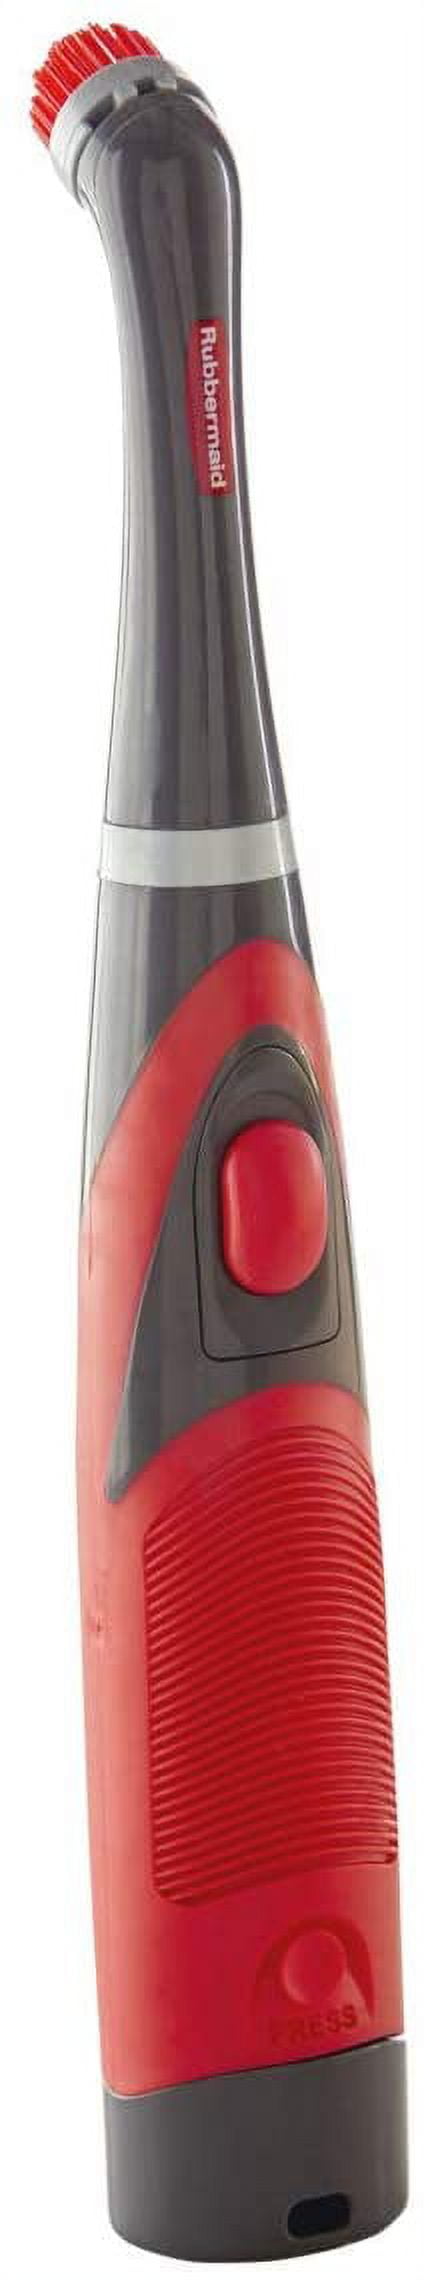 Rubbermaid Reveal Power Scrubber with 1/2 Inch General Cleaning Head,  1839685 